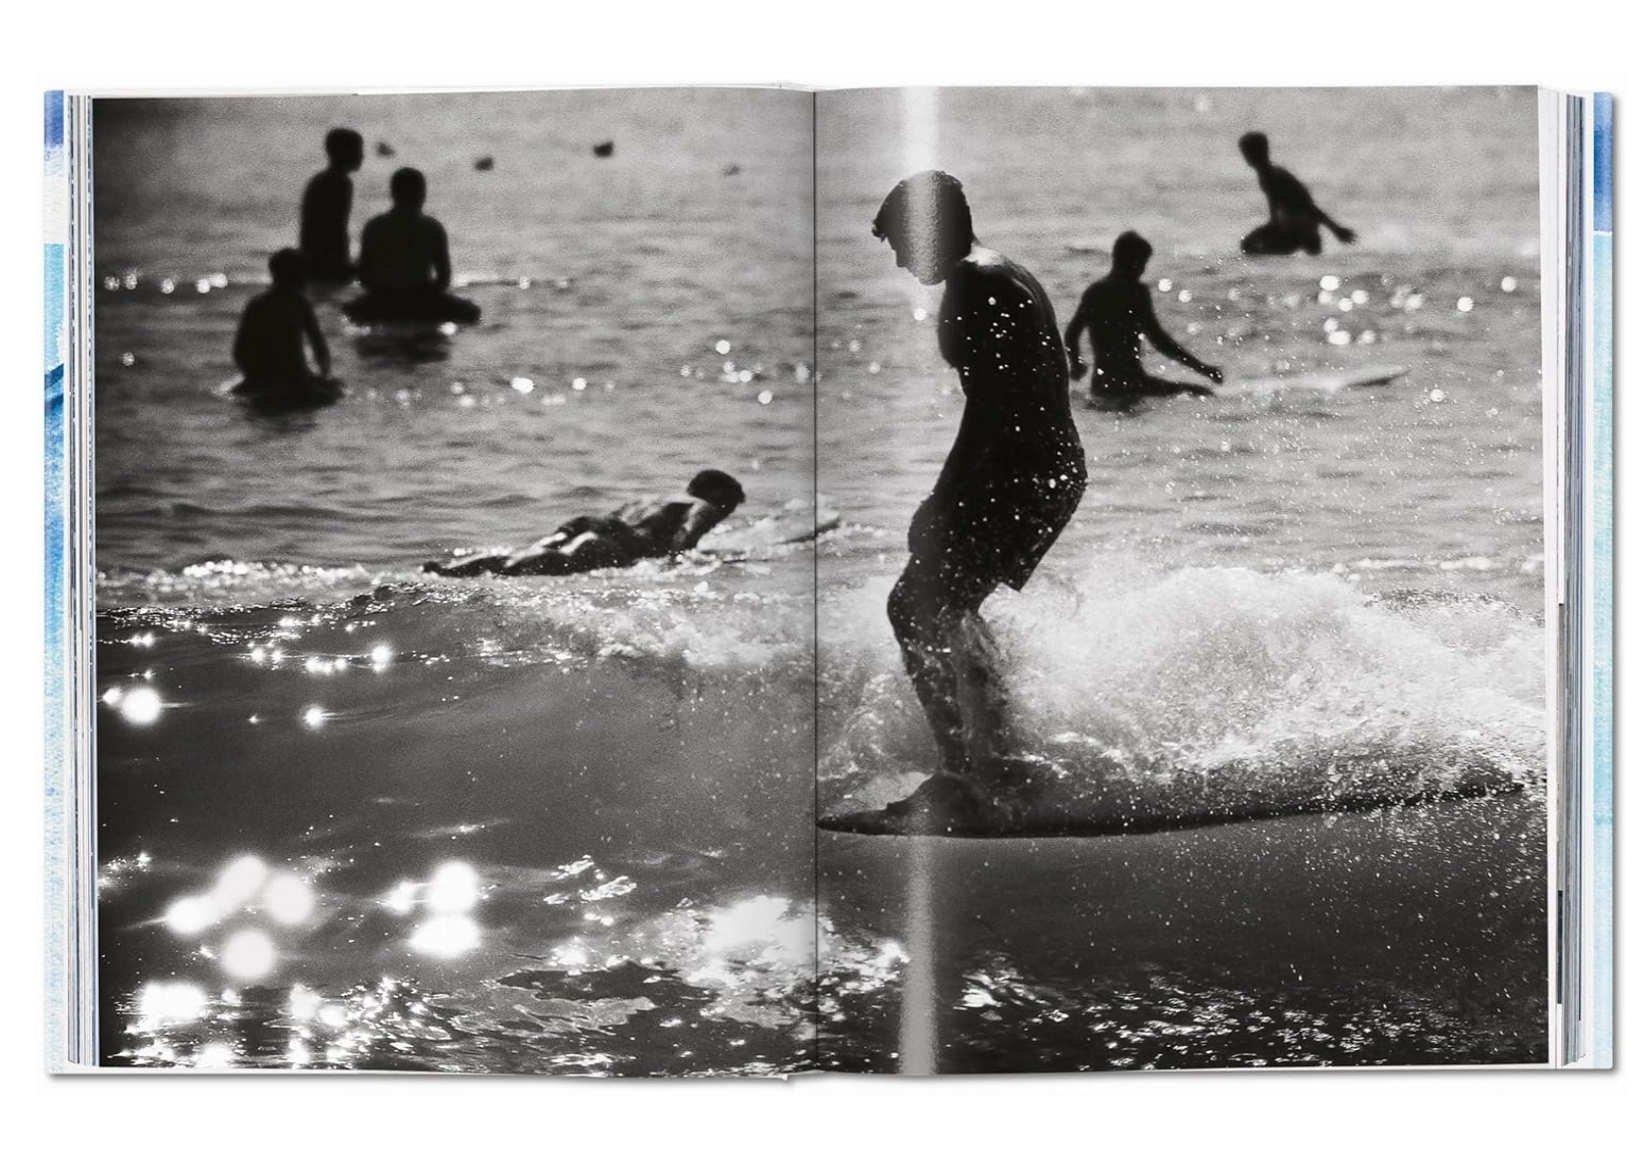 A black and white photo showing multiple people enjoying a day at the beach, with one person in focus seen running through shallow water near a bungalow, sunlight reflecting off the surface from the Breitling Book of Surfing by Random House.